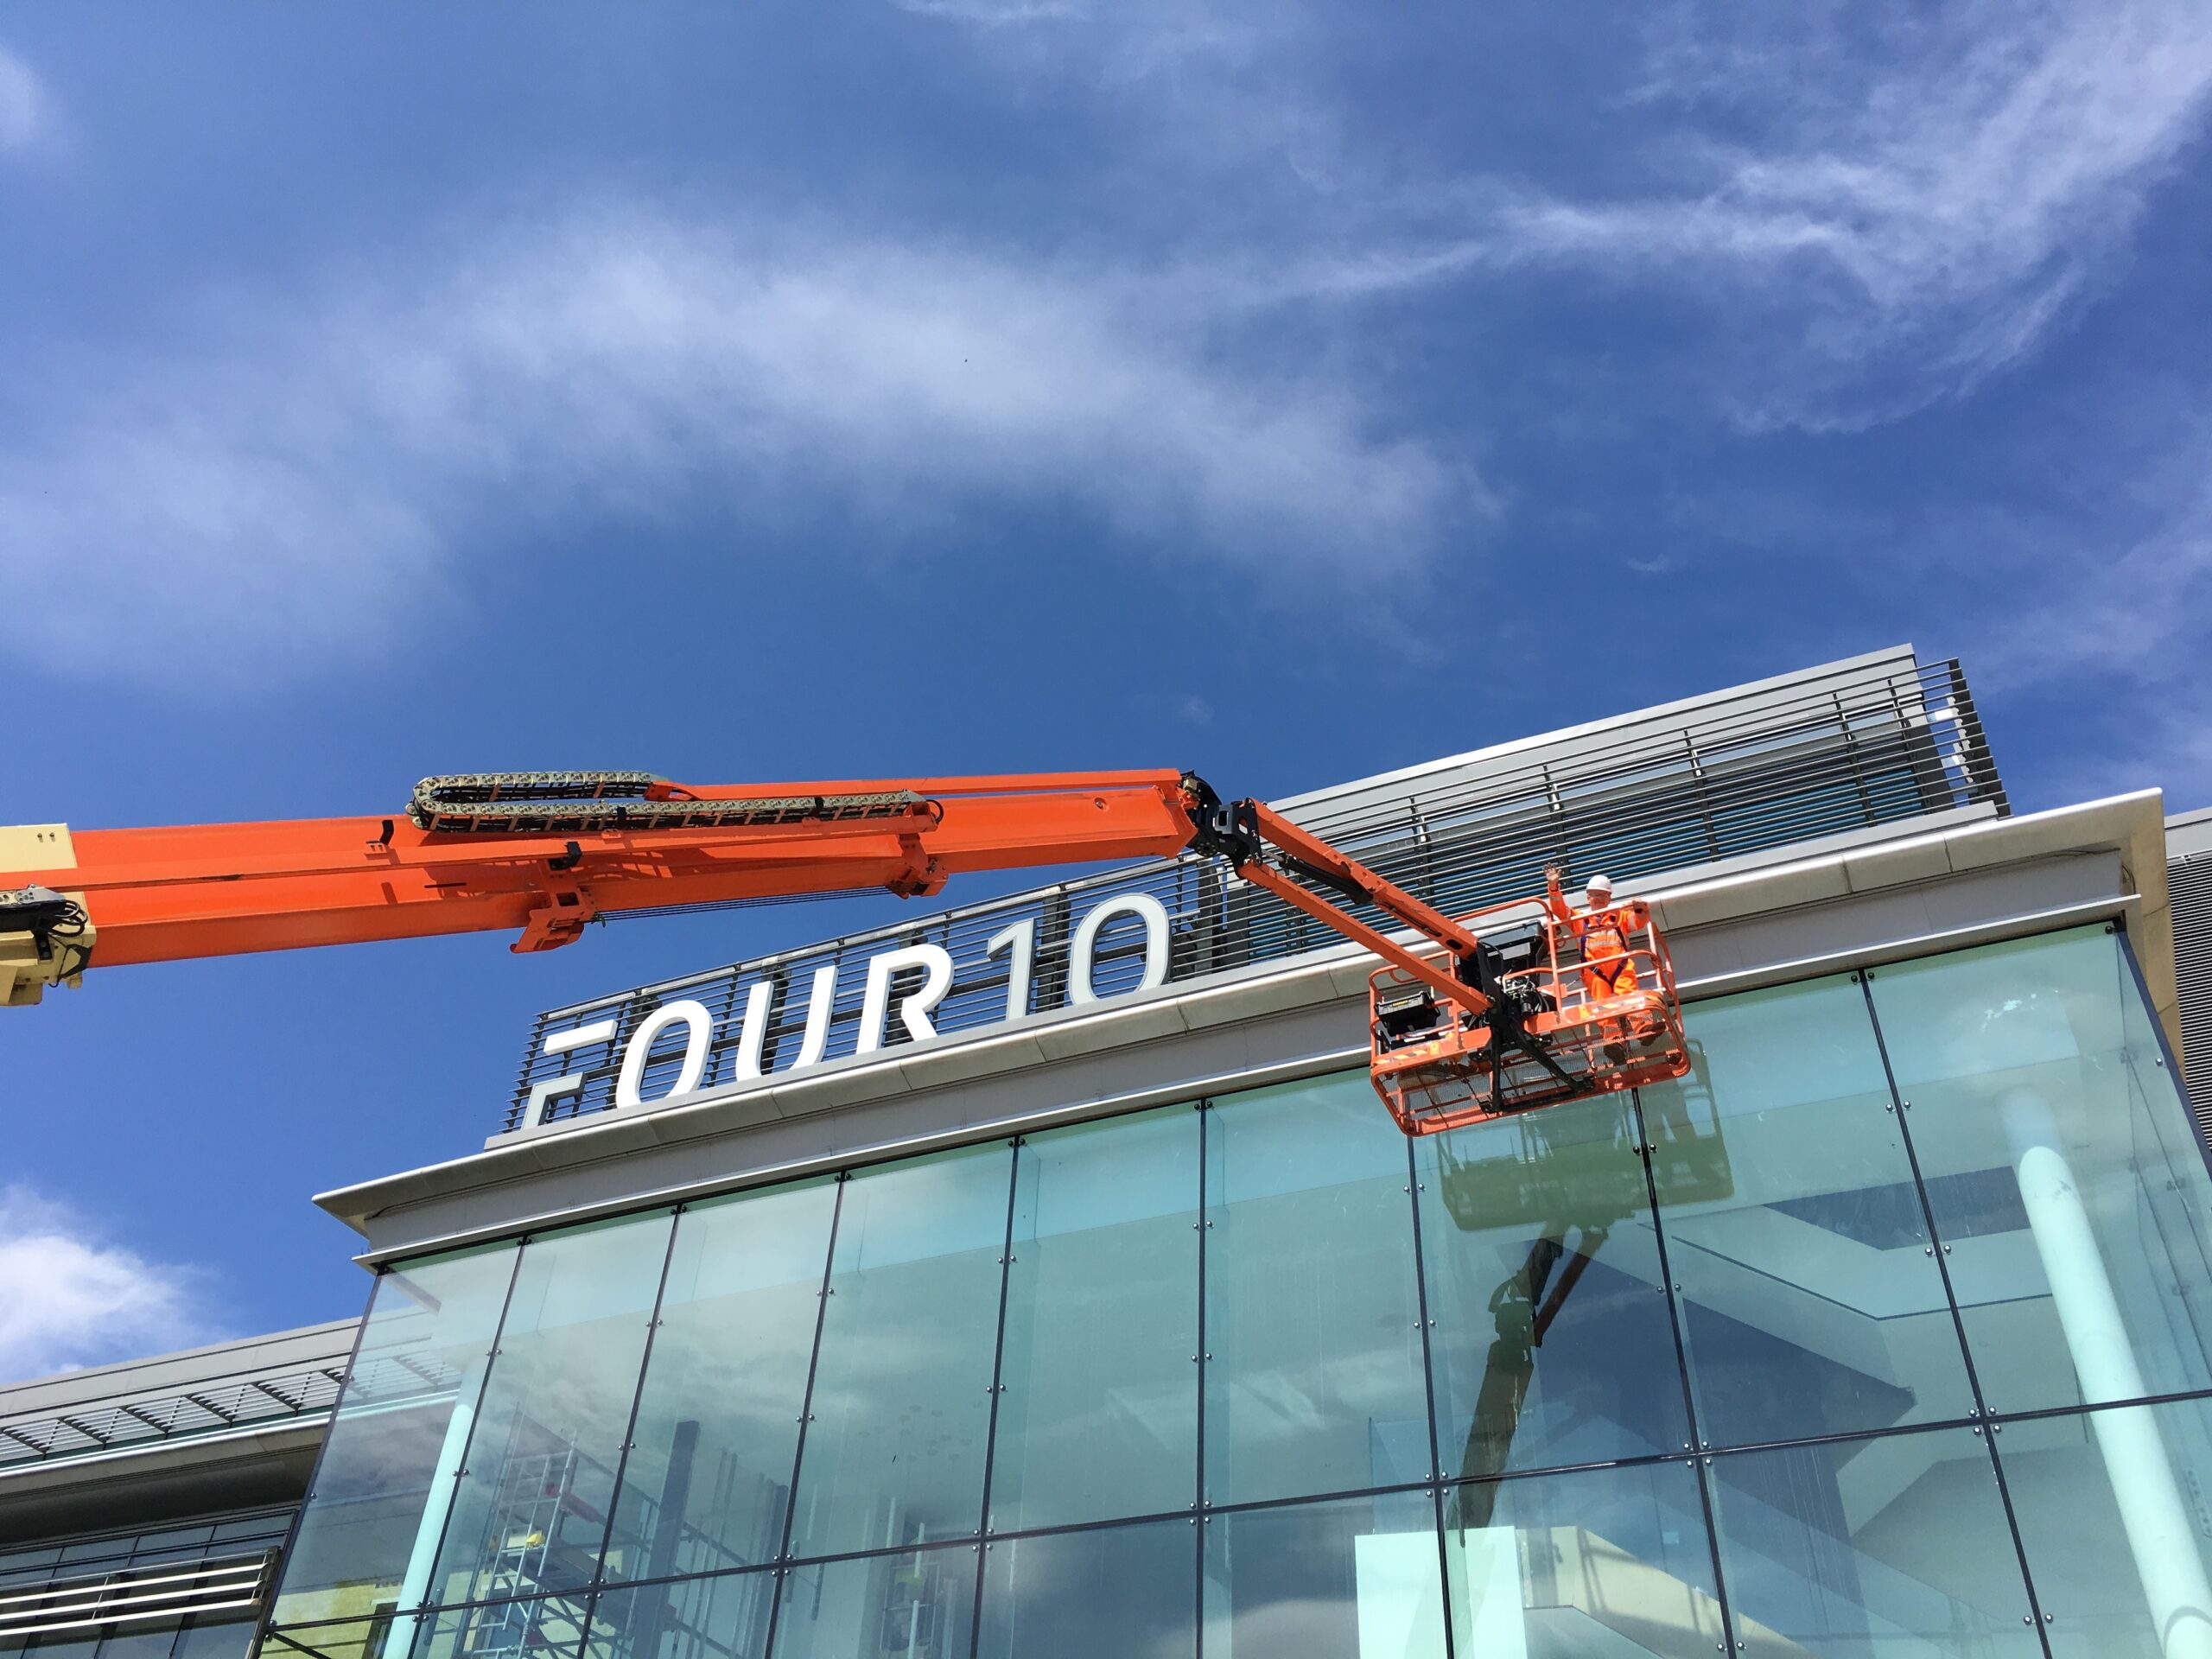 Commercial window cleaning services provided by Countrywide